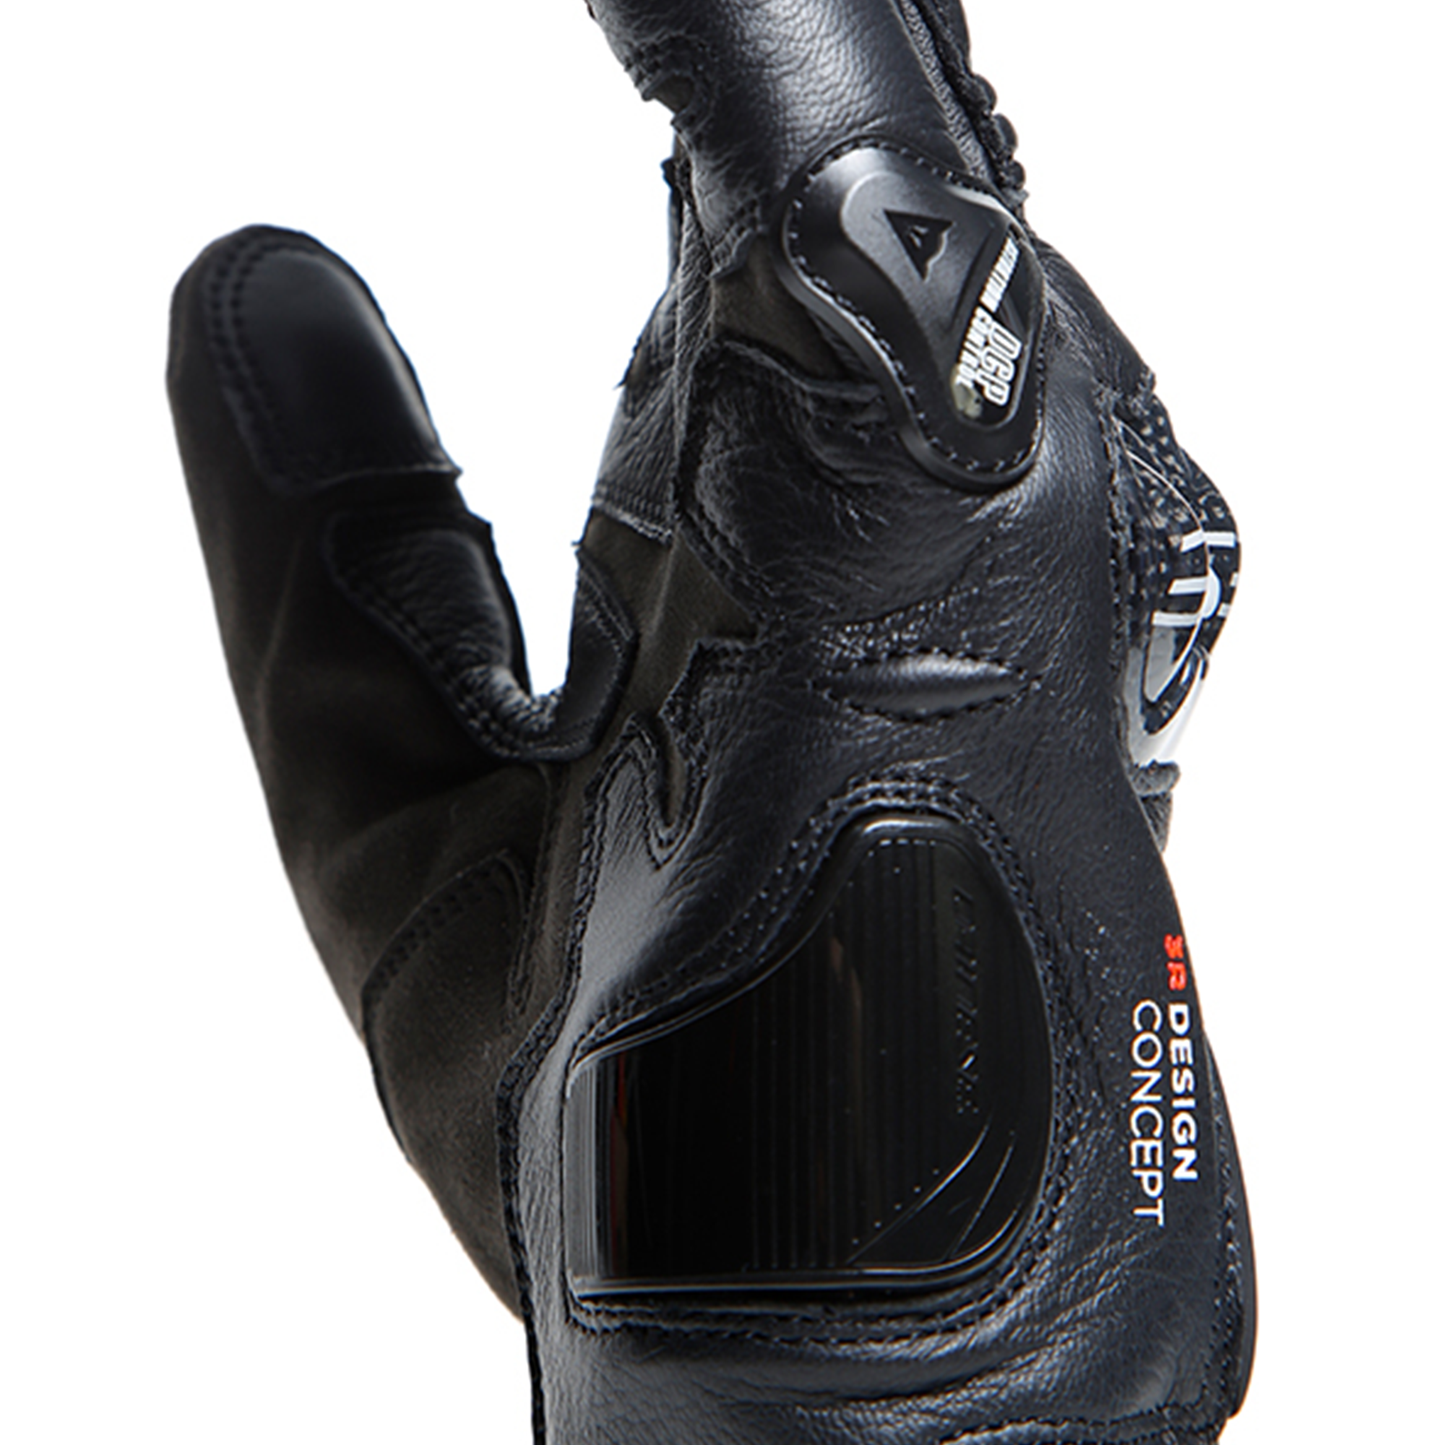 Dainese Carbon 4 Short Leather Gloves - Black/Flo Red